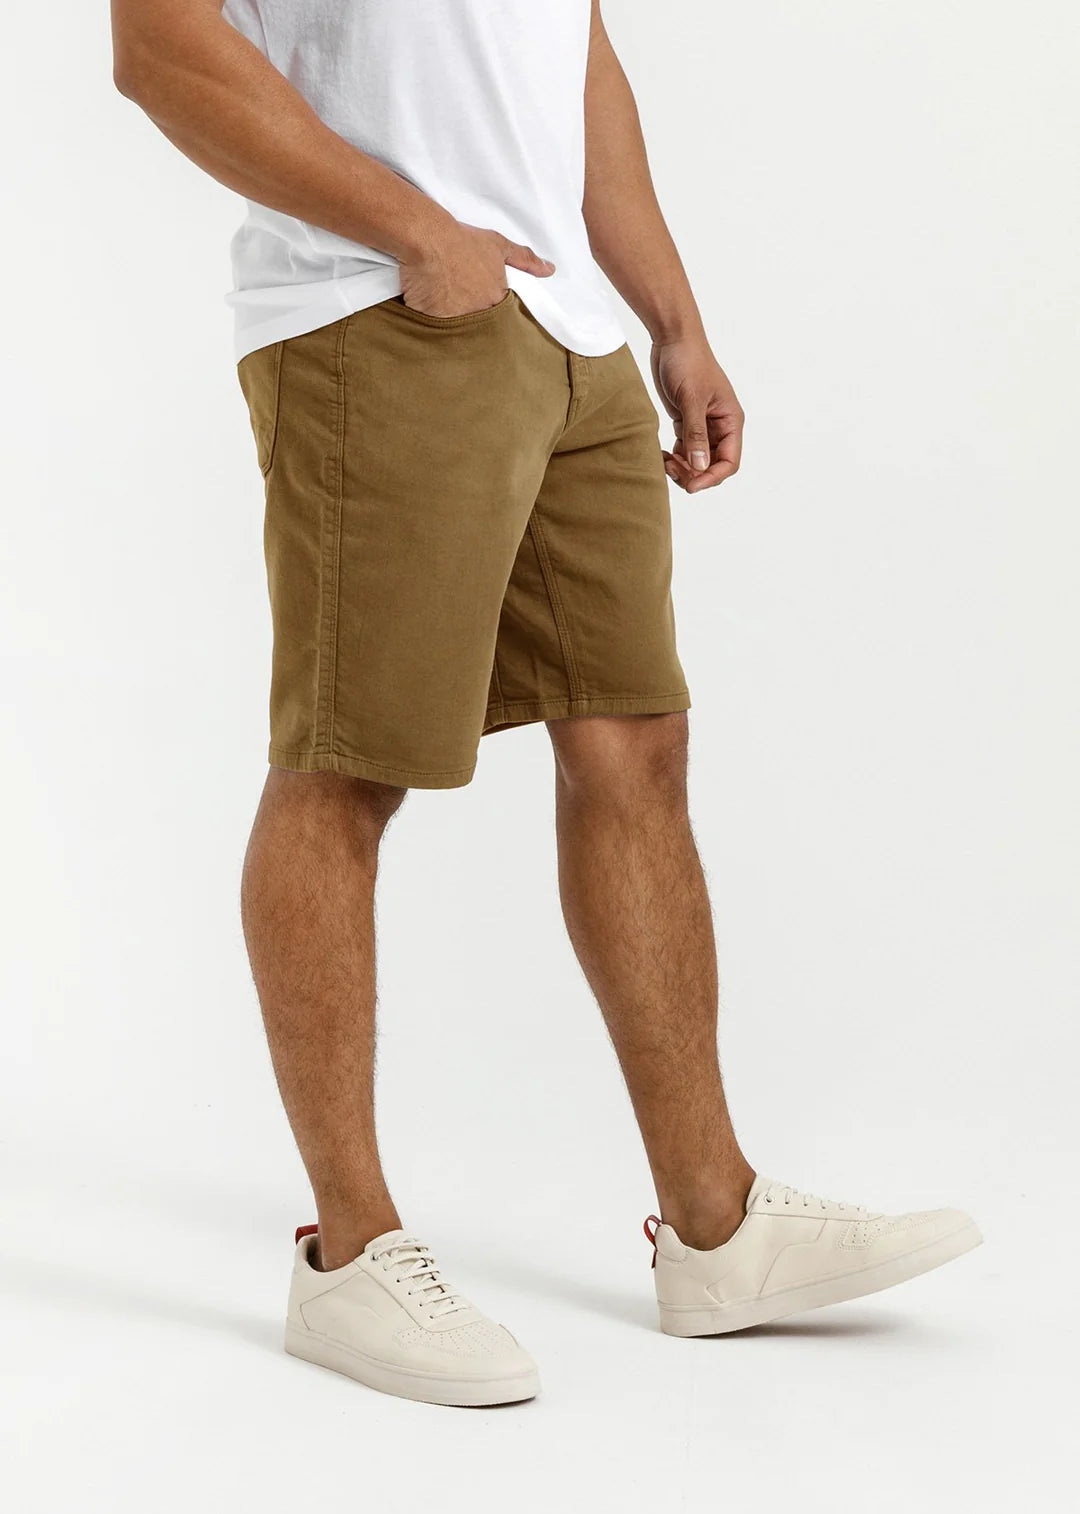 No Sweat Relaxed Short - 10”